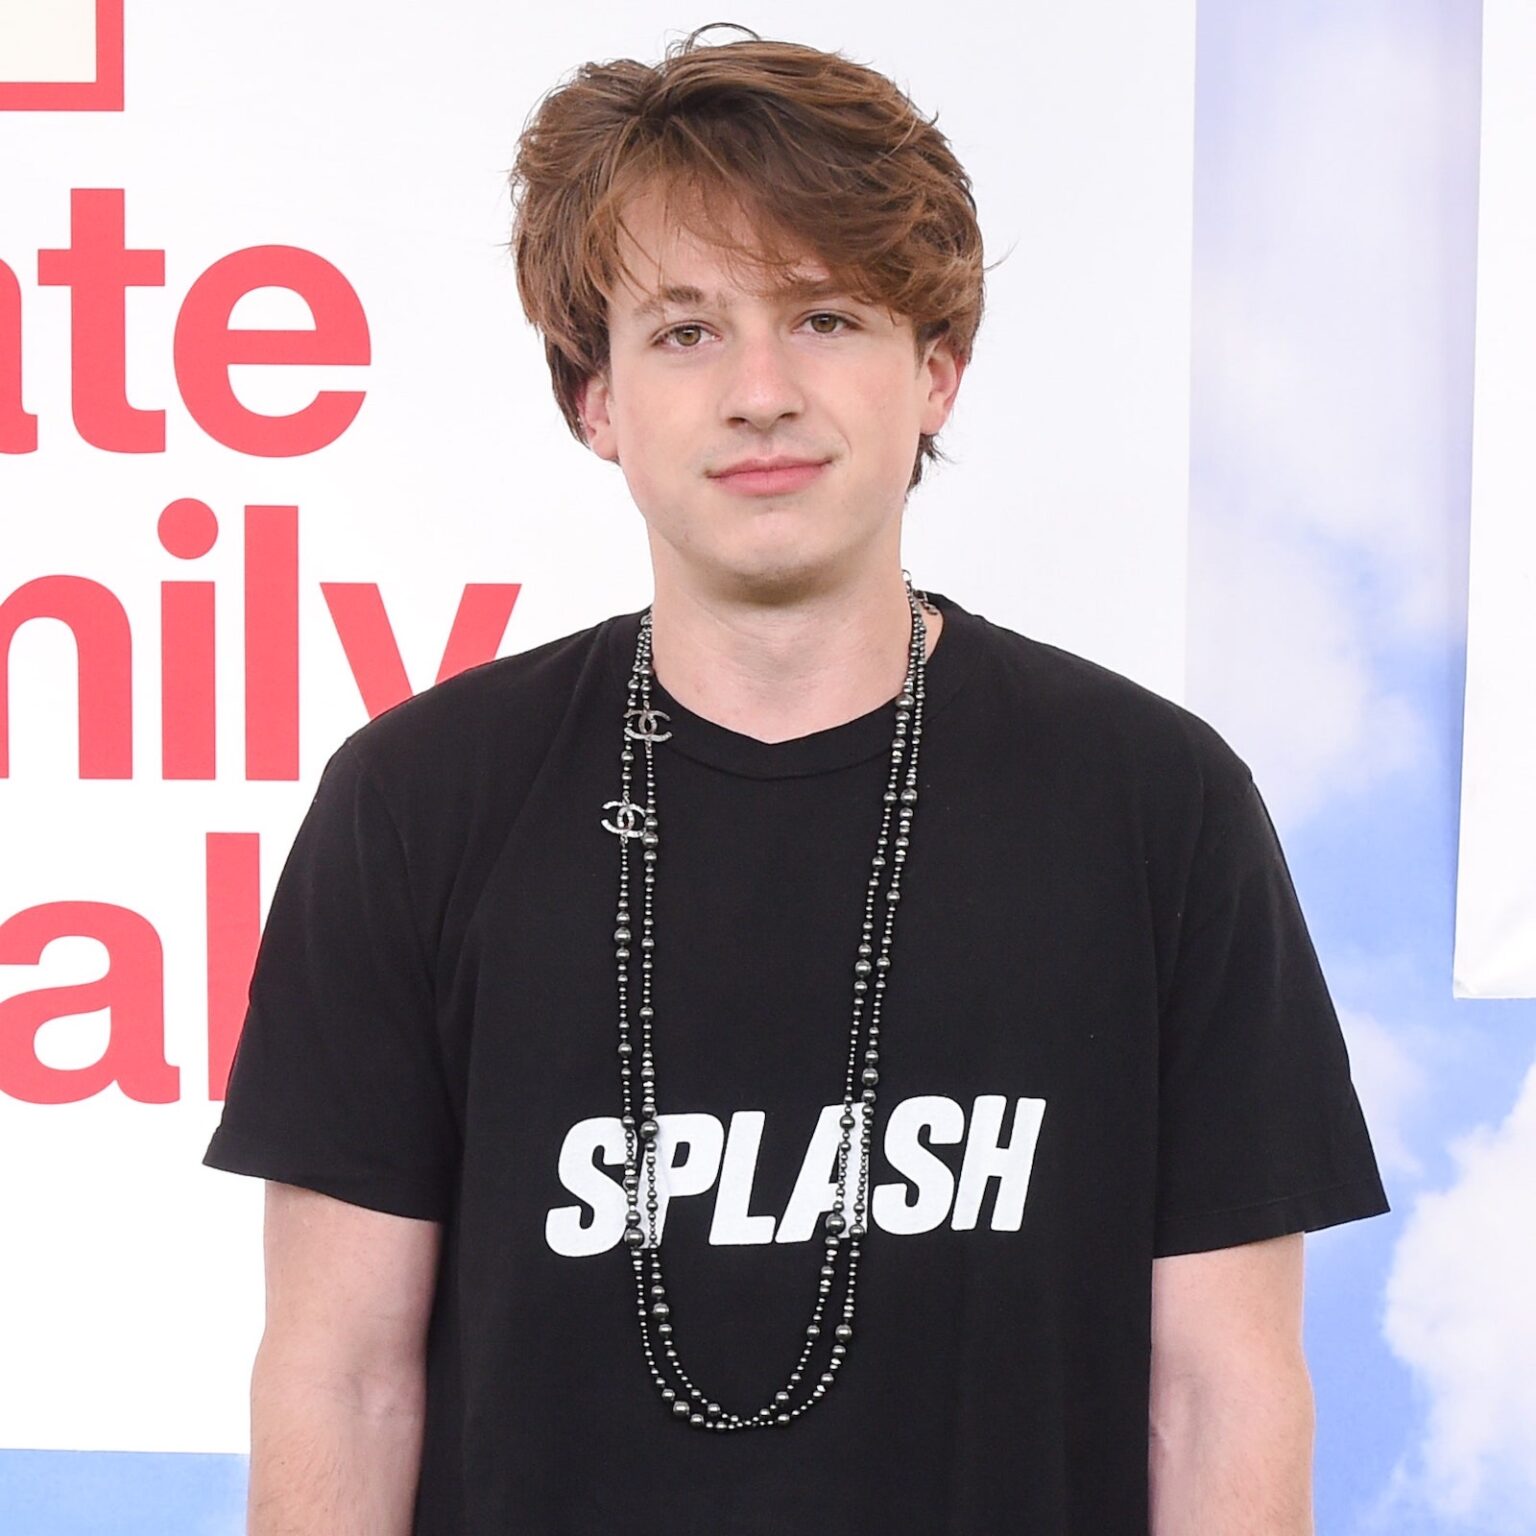 New shirtless photos of musician Charlie Puth are gaining attention. Here's how critics and fans are responding to the body shaming.